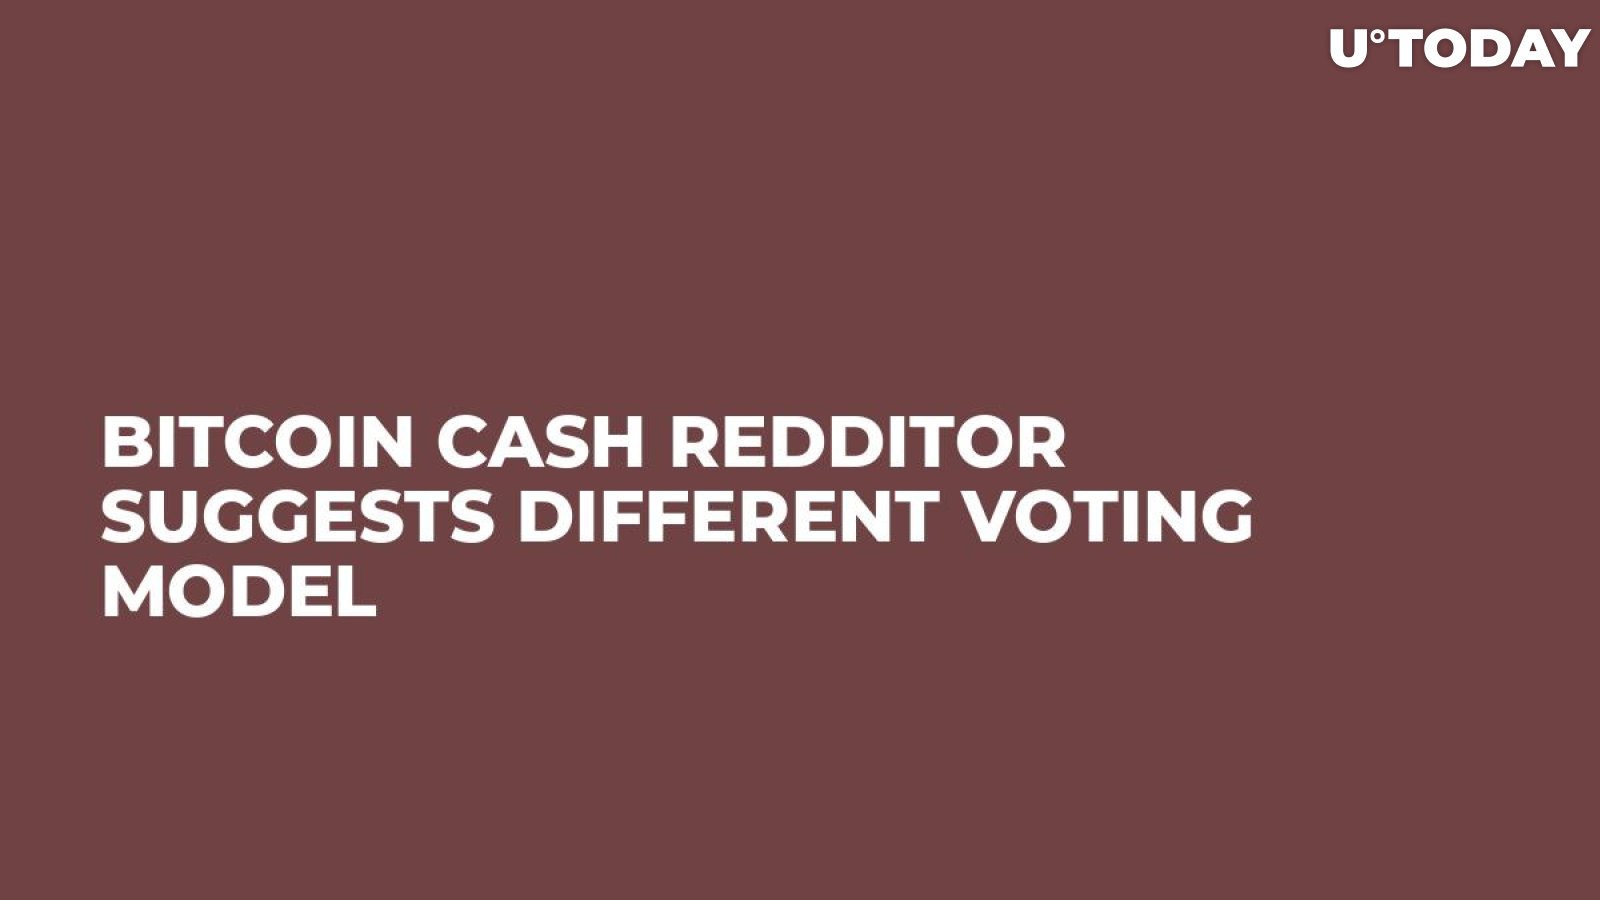 Bitcoin Cash Redditor Suggests Different Voting Model